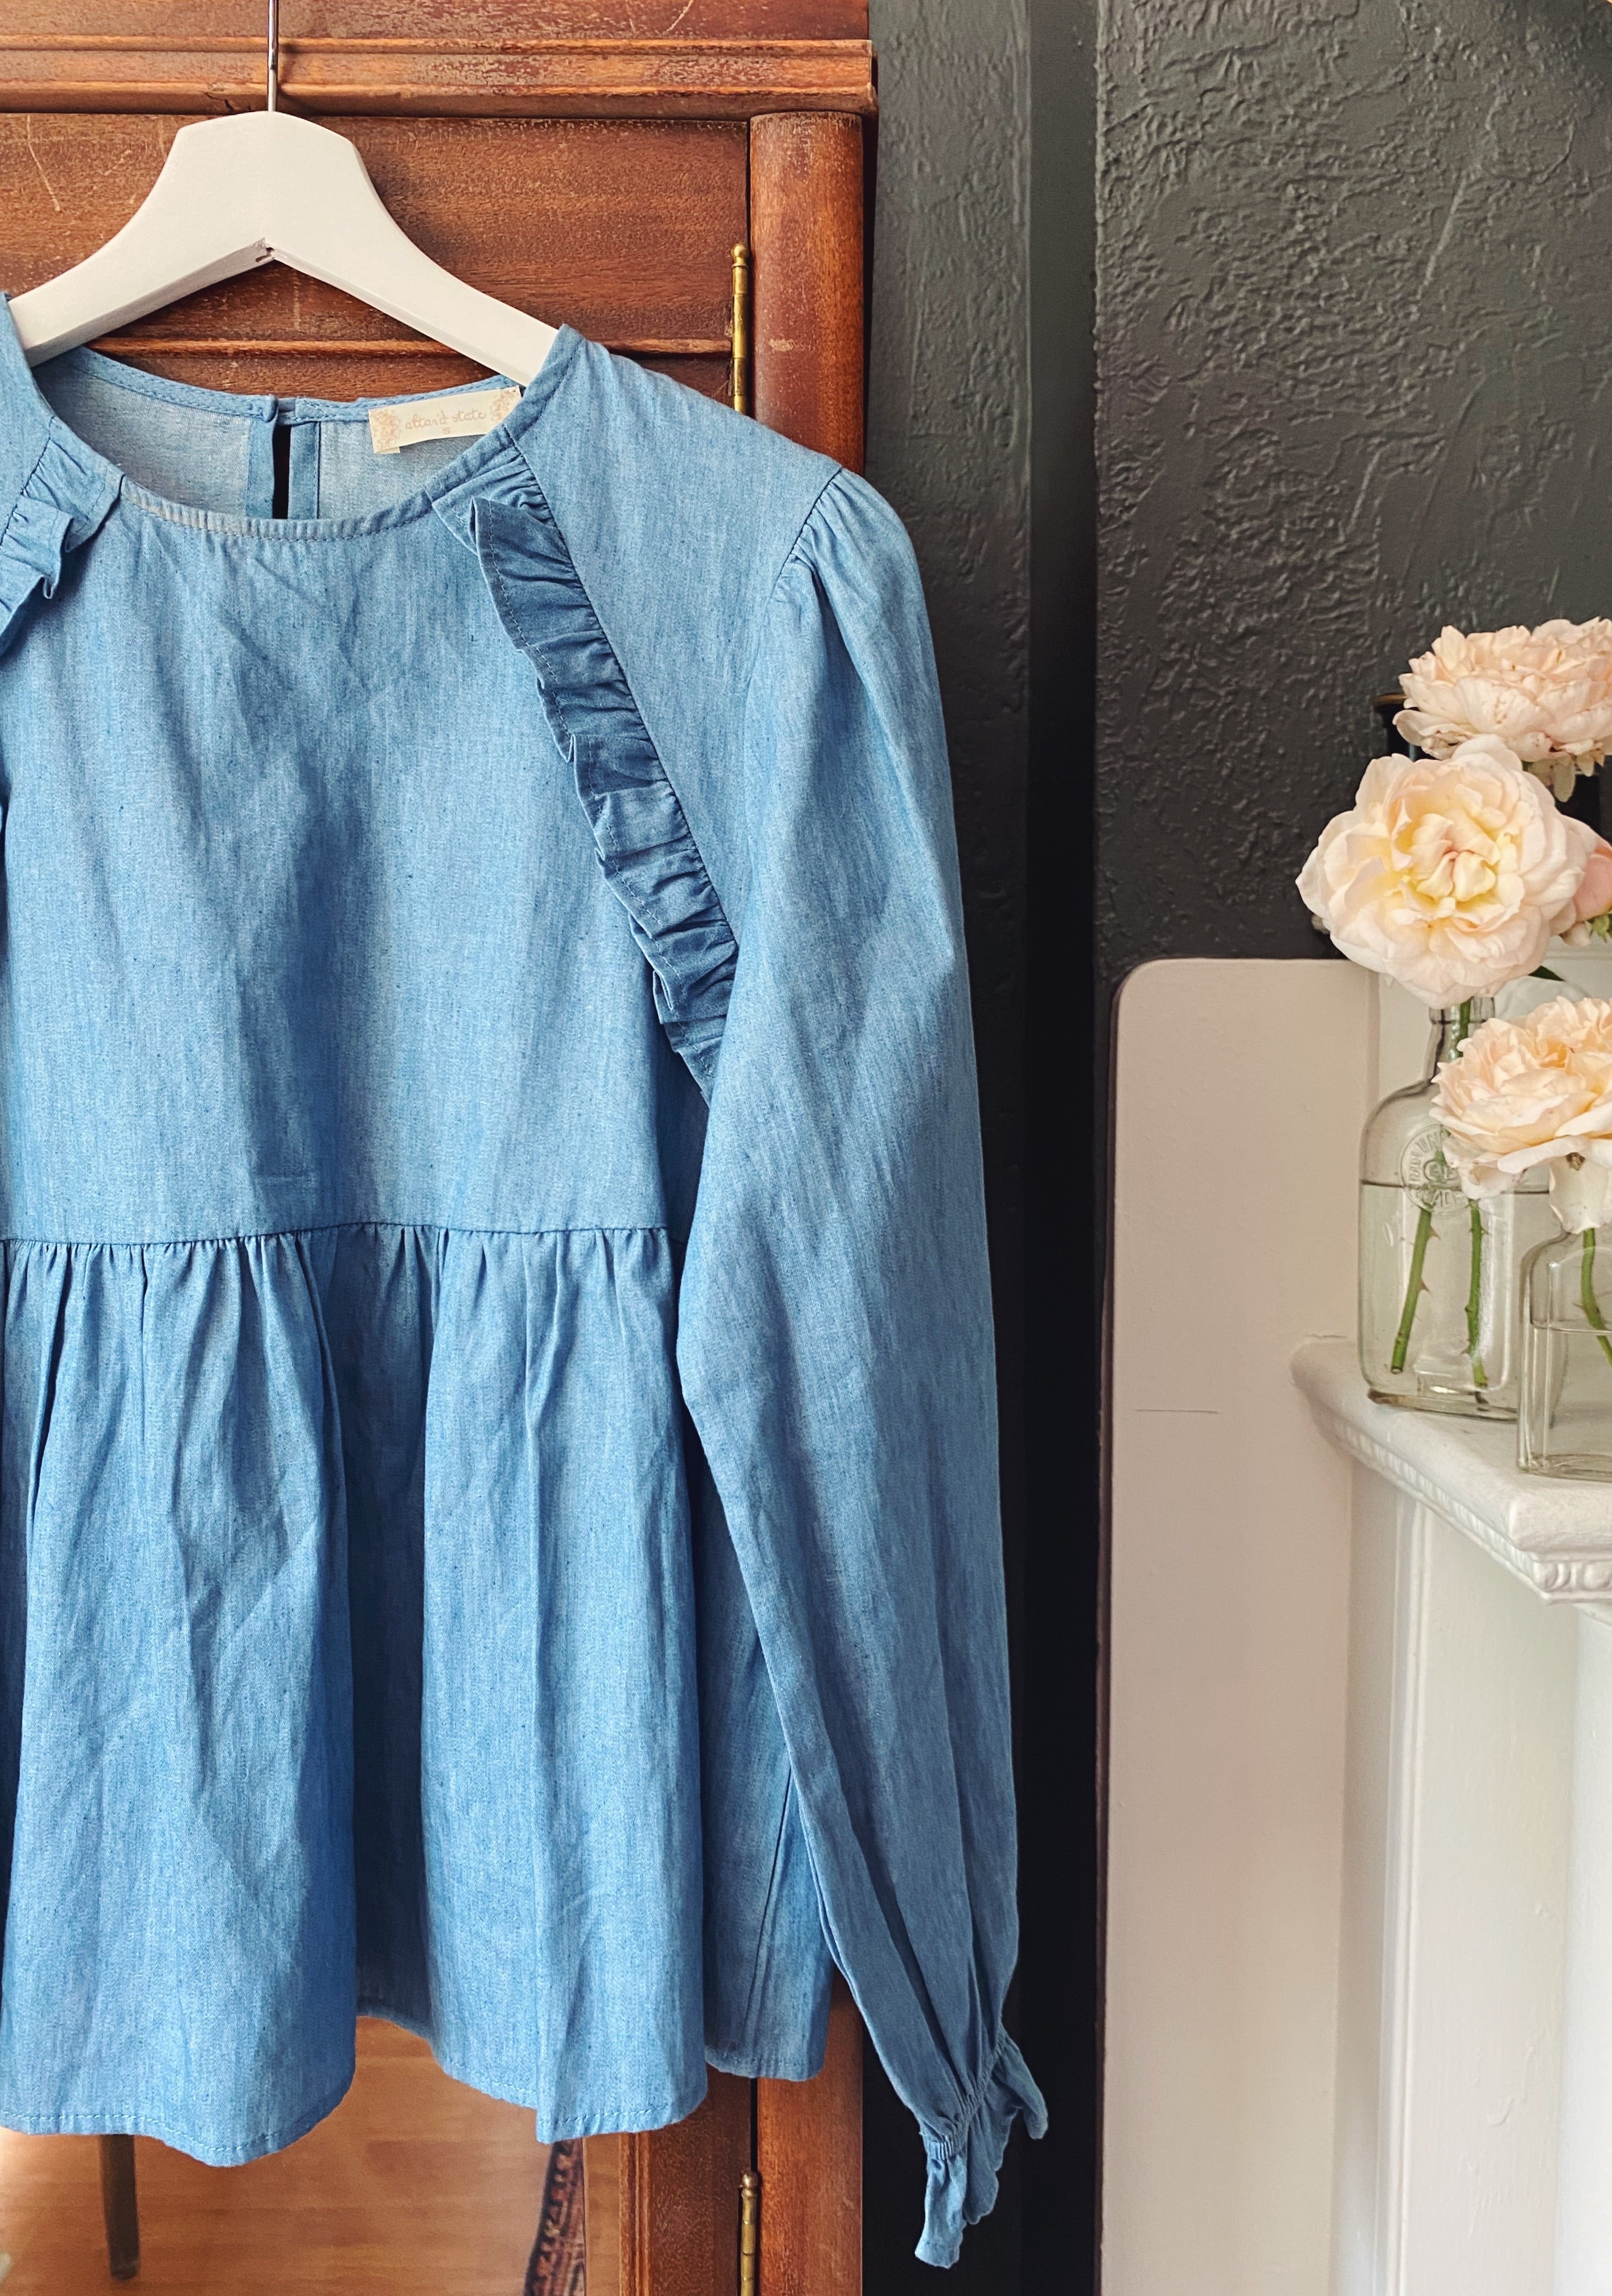 Altar'd State 100% Cotton Chambray Ruffle Blouse